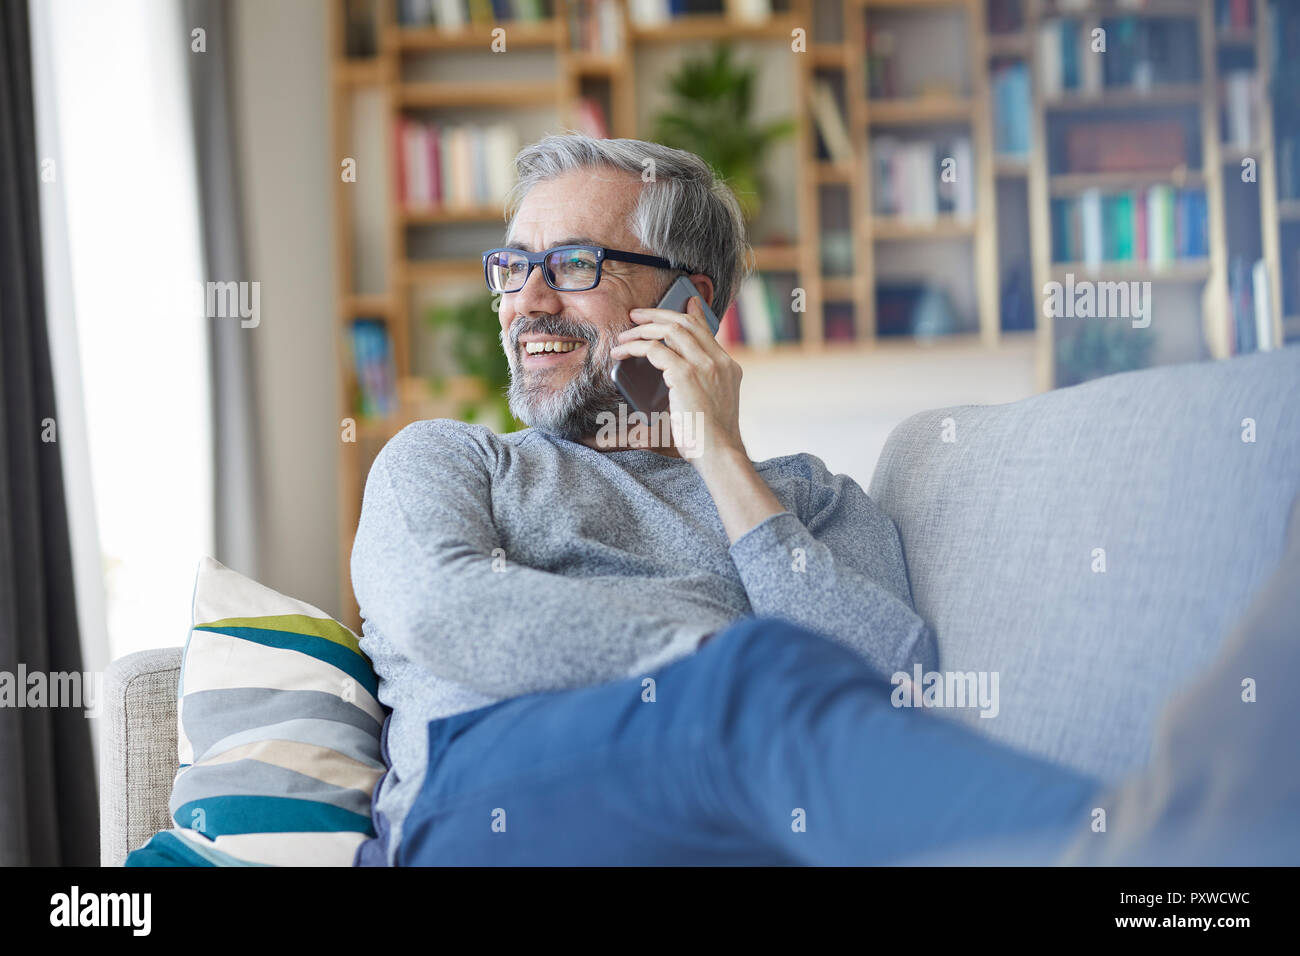 Mature man on the phone sitting on couch at home looking out of window Stock Photo